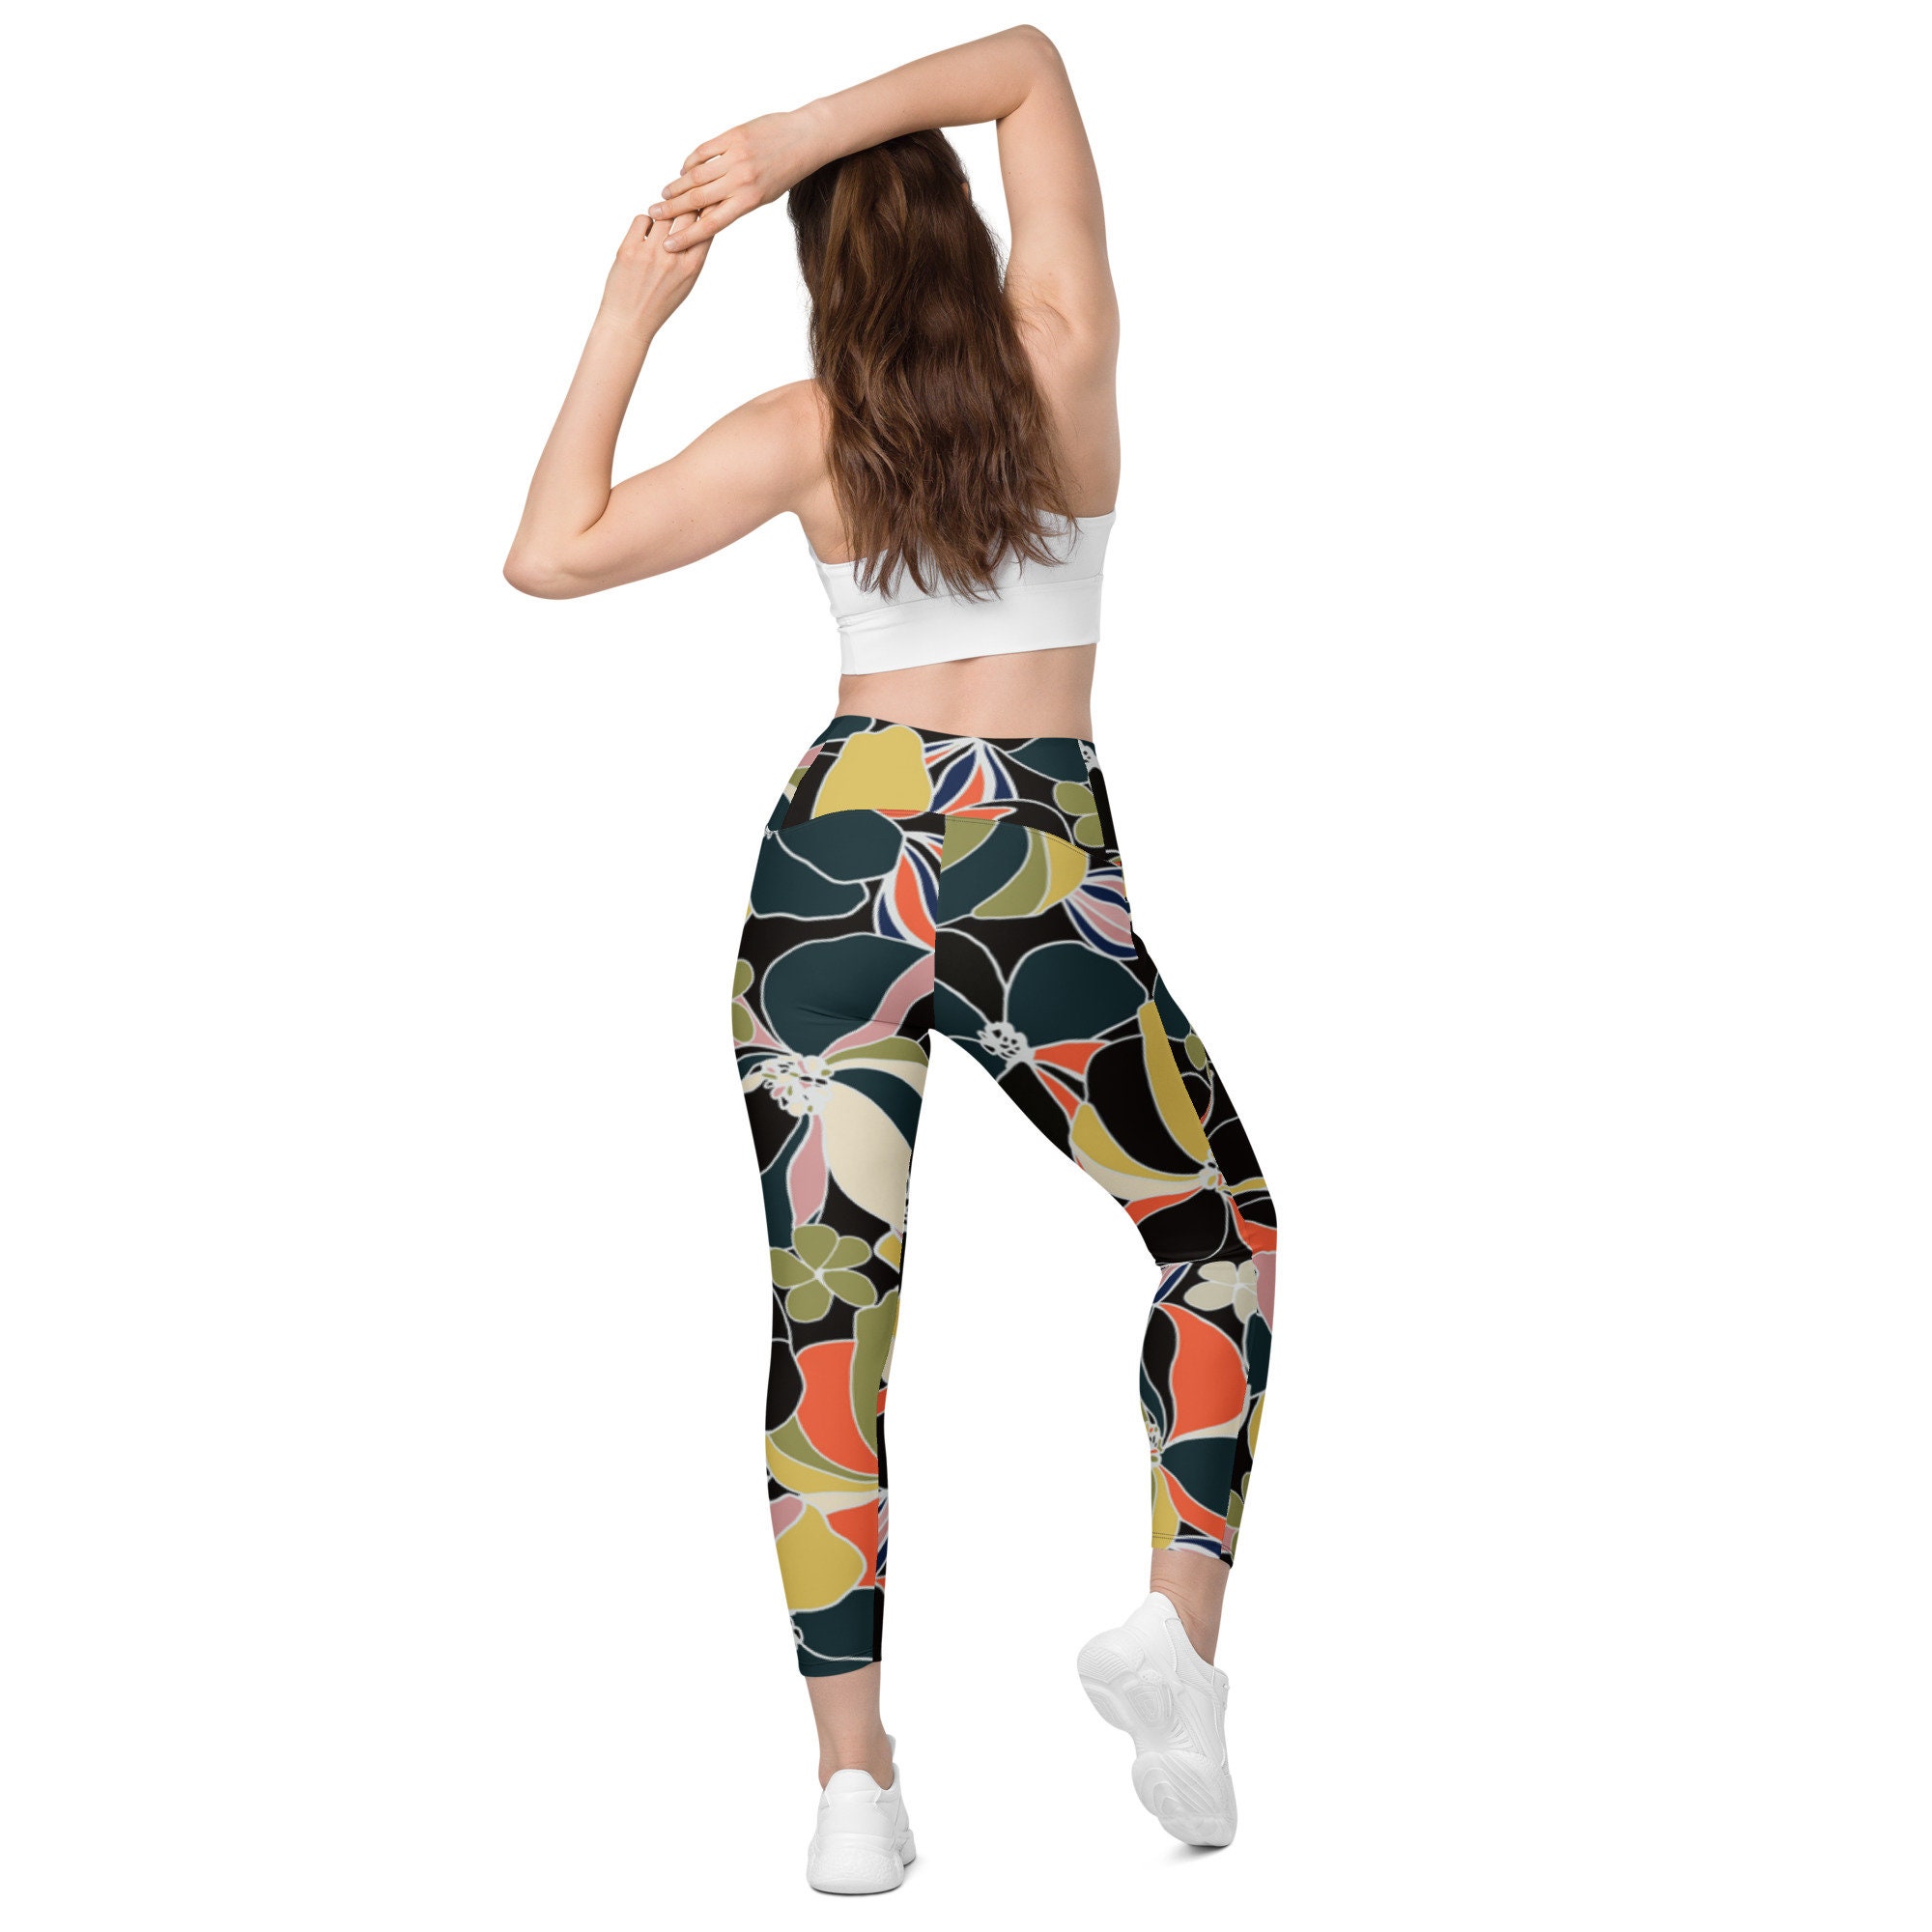 Discover 60's Inspired Crossover leggings with pockets